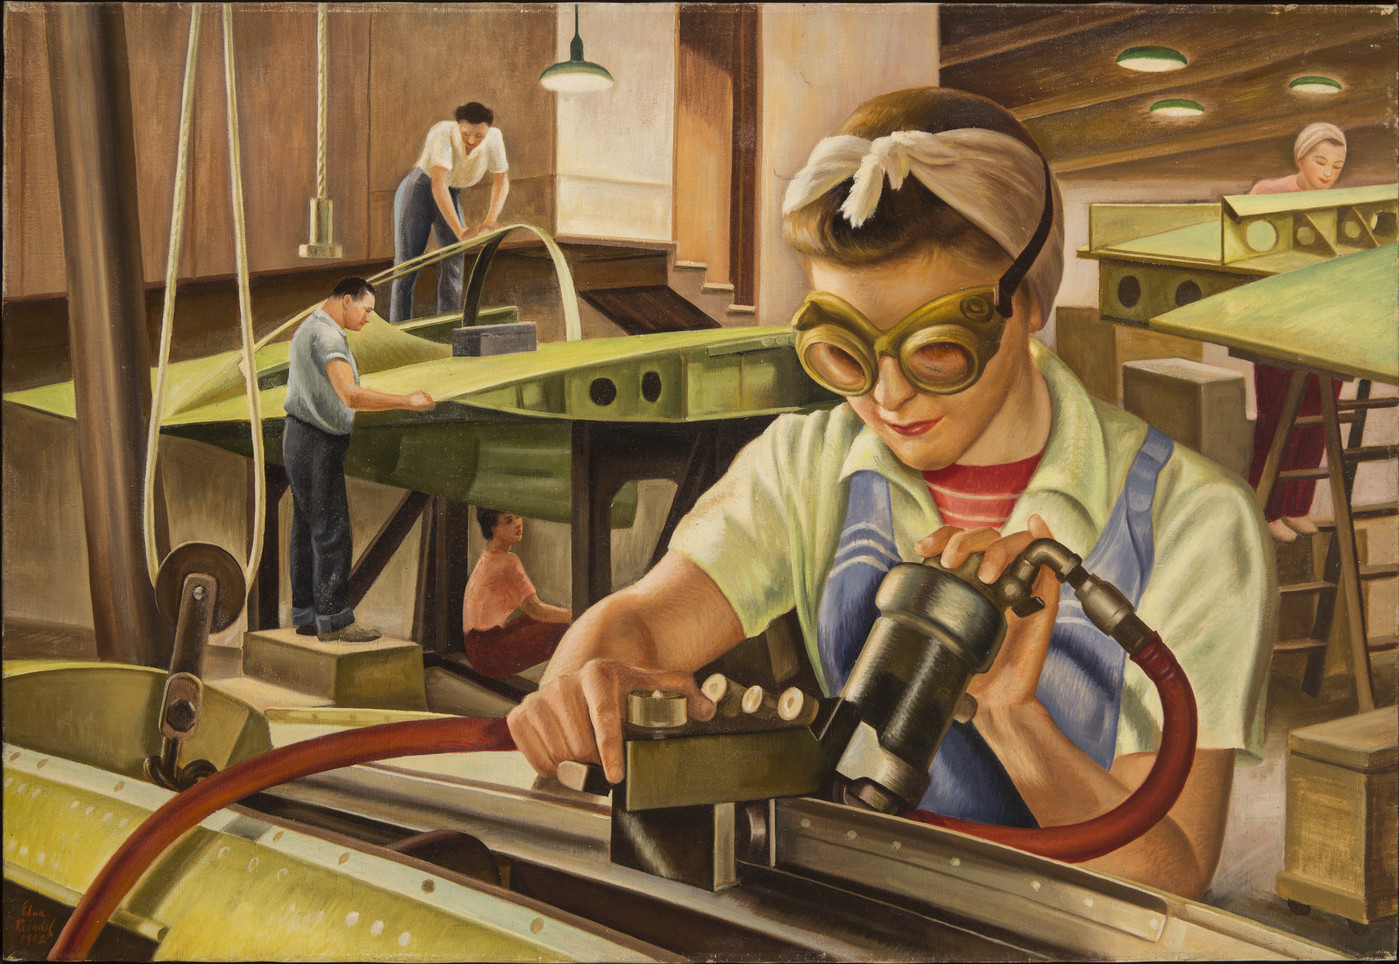 Painting of a light-skinned woman wearing safety goggles and working with machinery in an industrial warehouse setting. In the background, other light-skinned figures work on airplane parts.